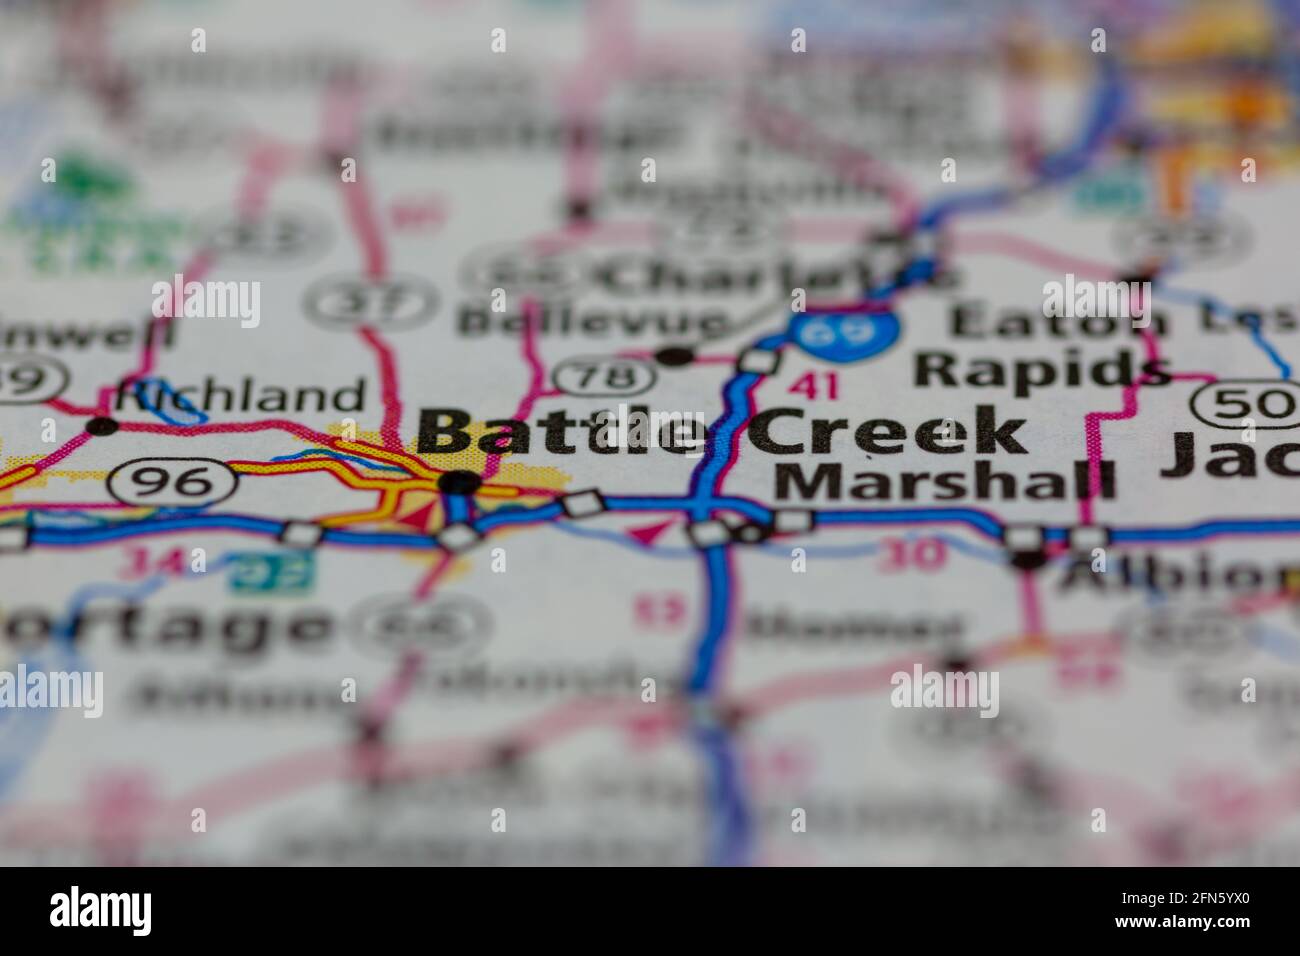 Battle Creek Michigan USA shown on a Geography map or road map Stock Photo